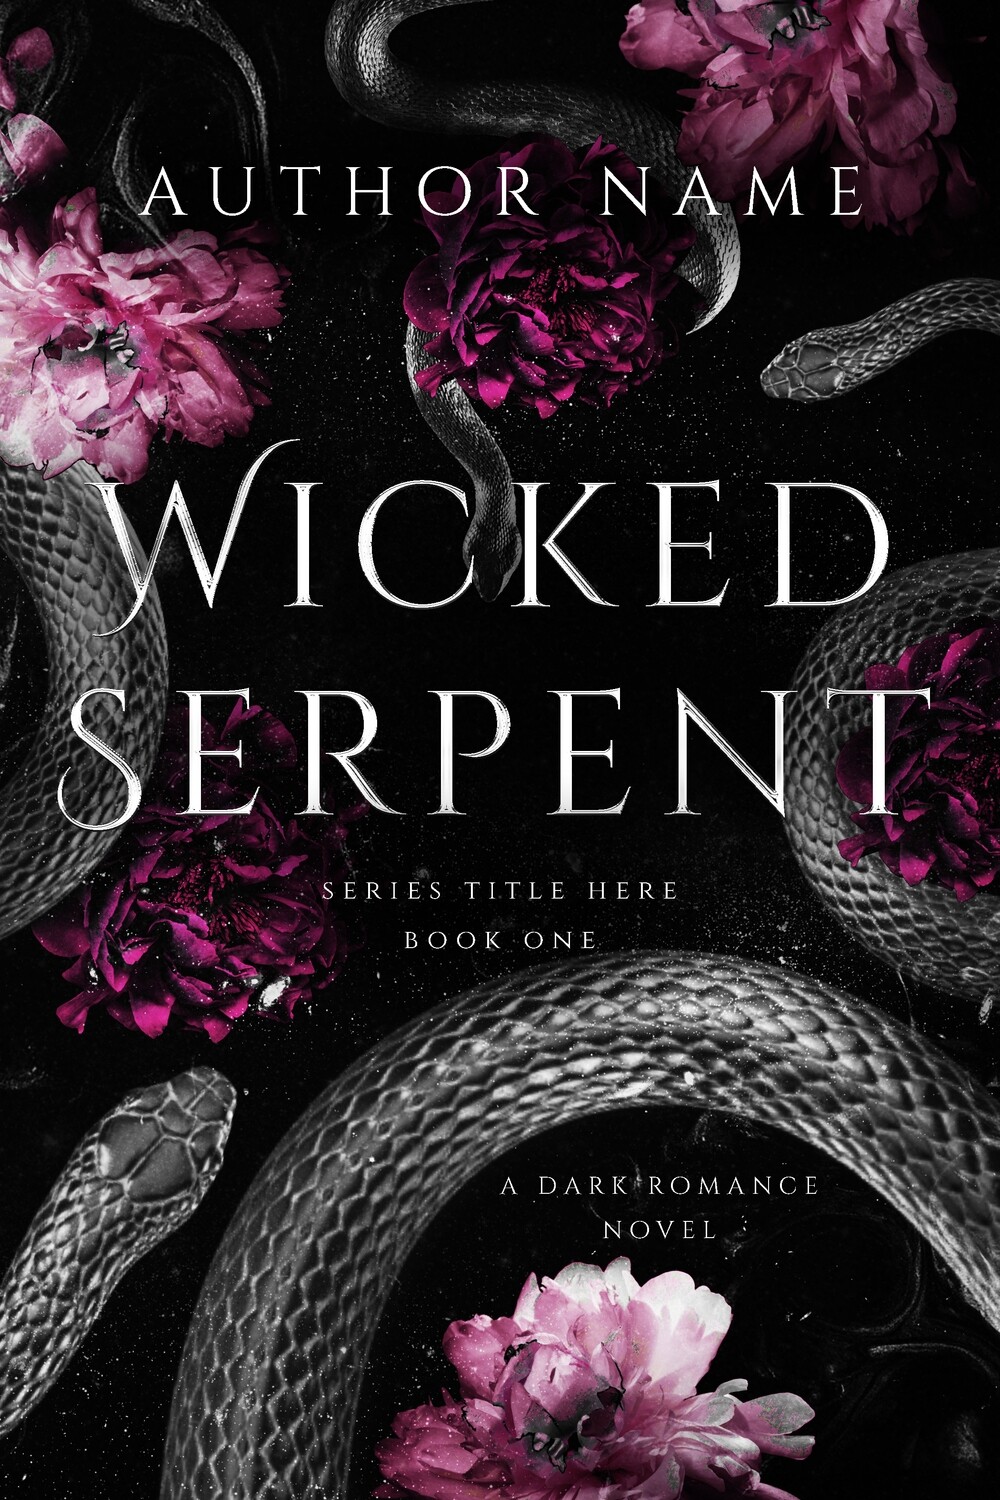 WICKED SERPENT